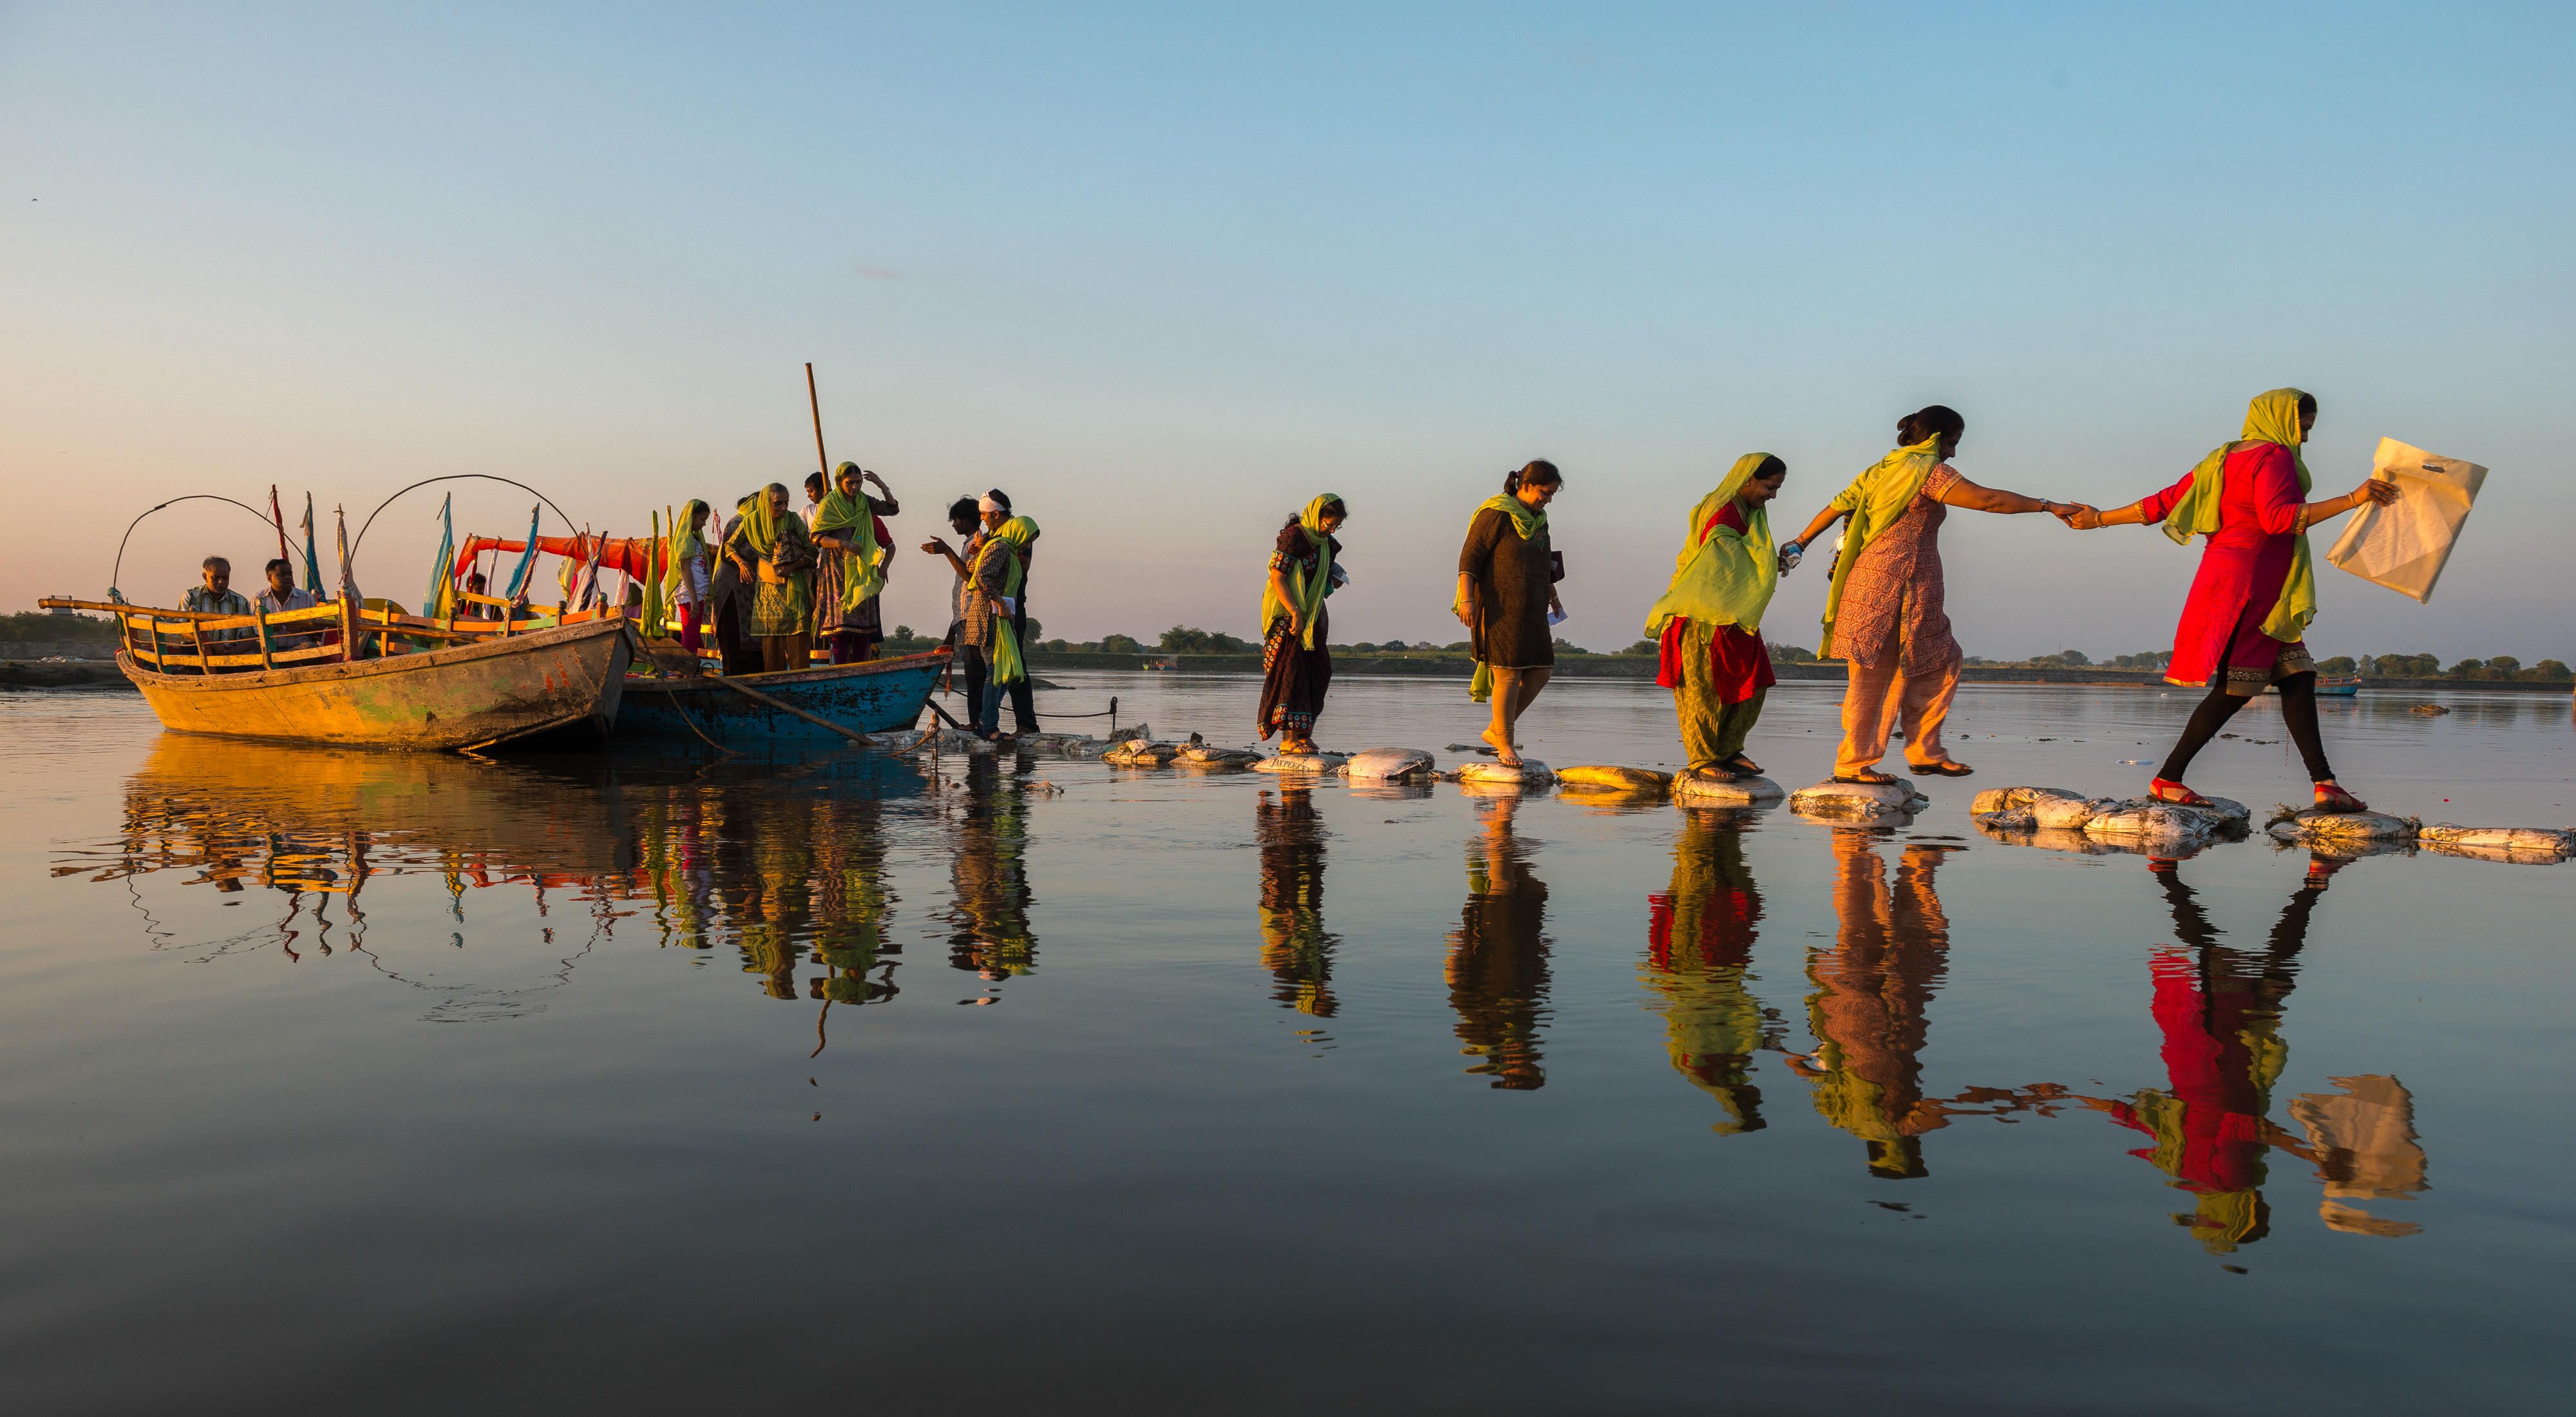 TNC India is working with partners to develop a framework for evaluating the consequences of alternative river actions on the health of the Middle Ganga